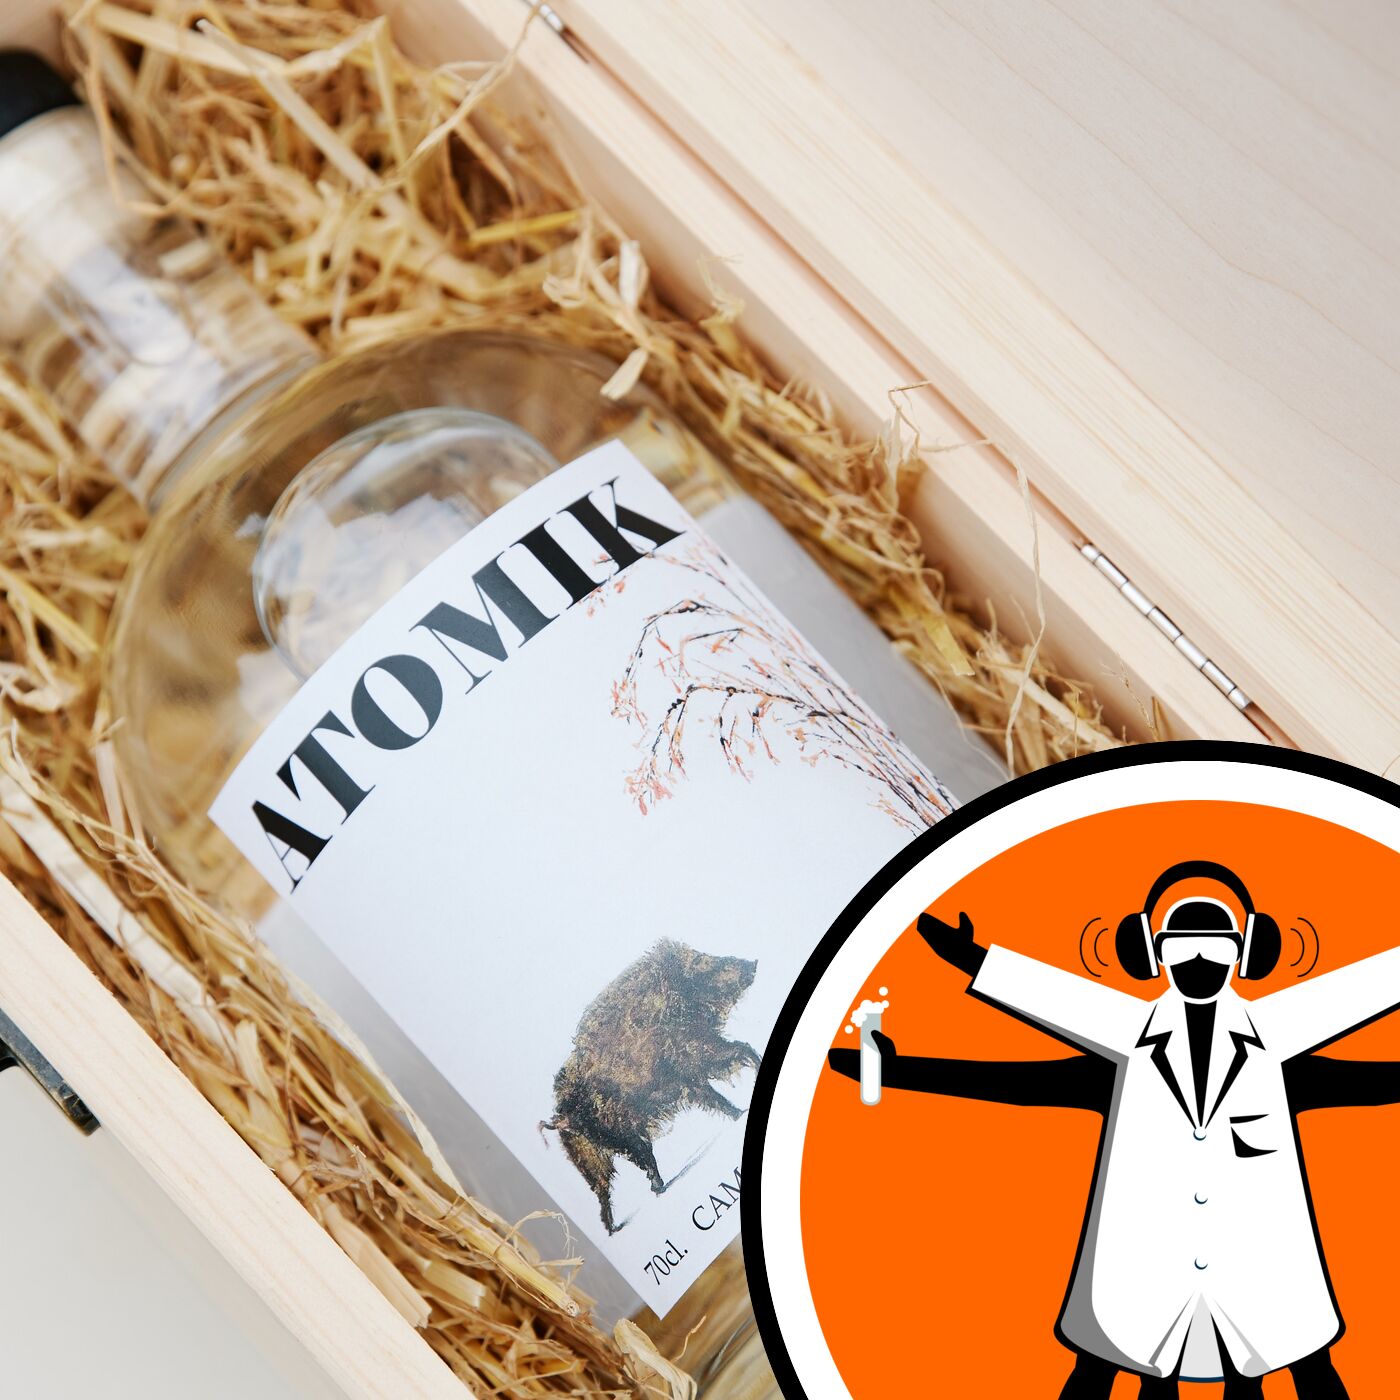 Vodka from Chernobyl on its way to UK